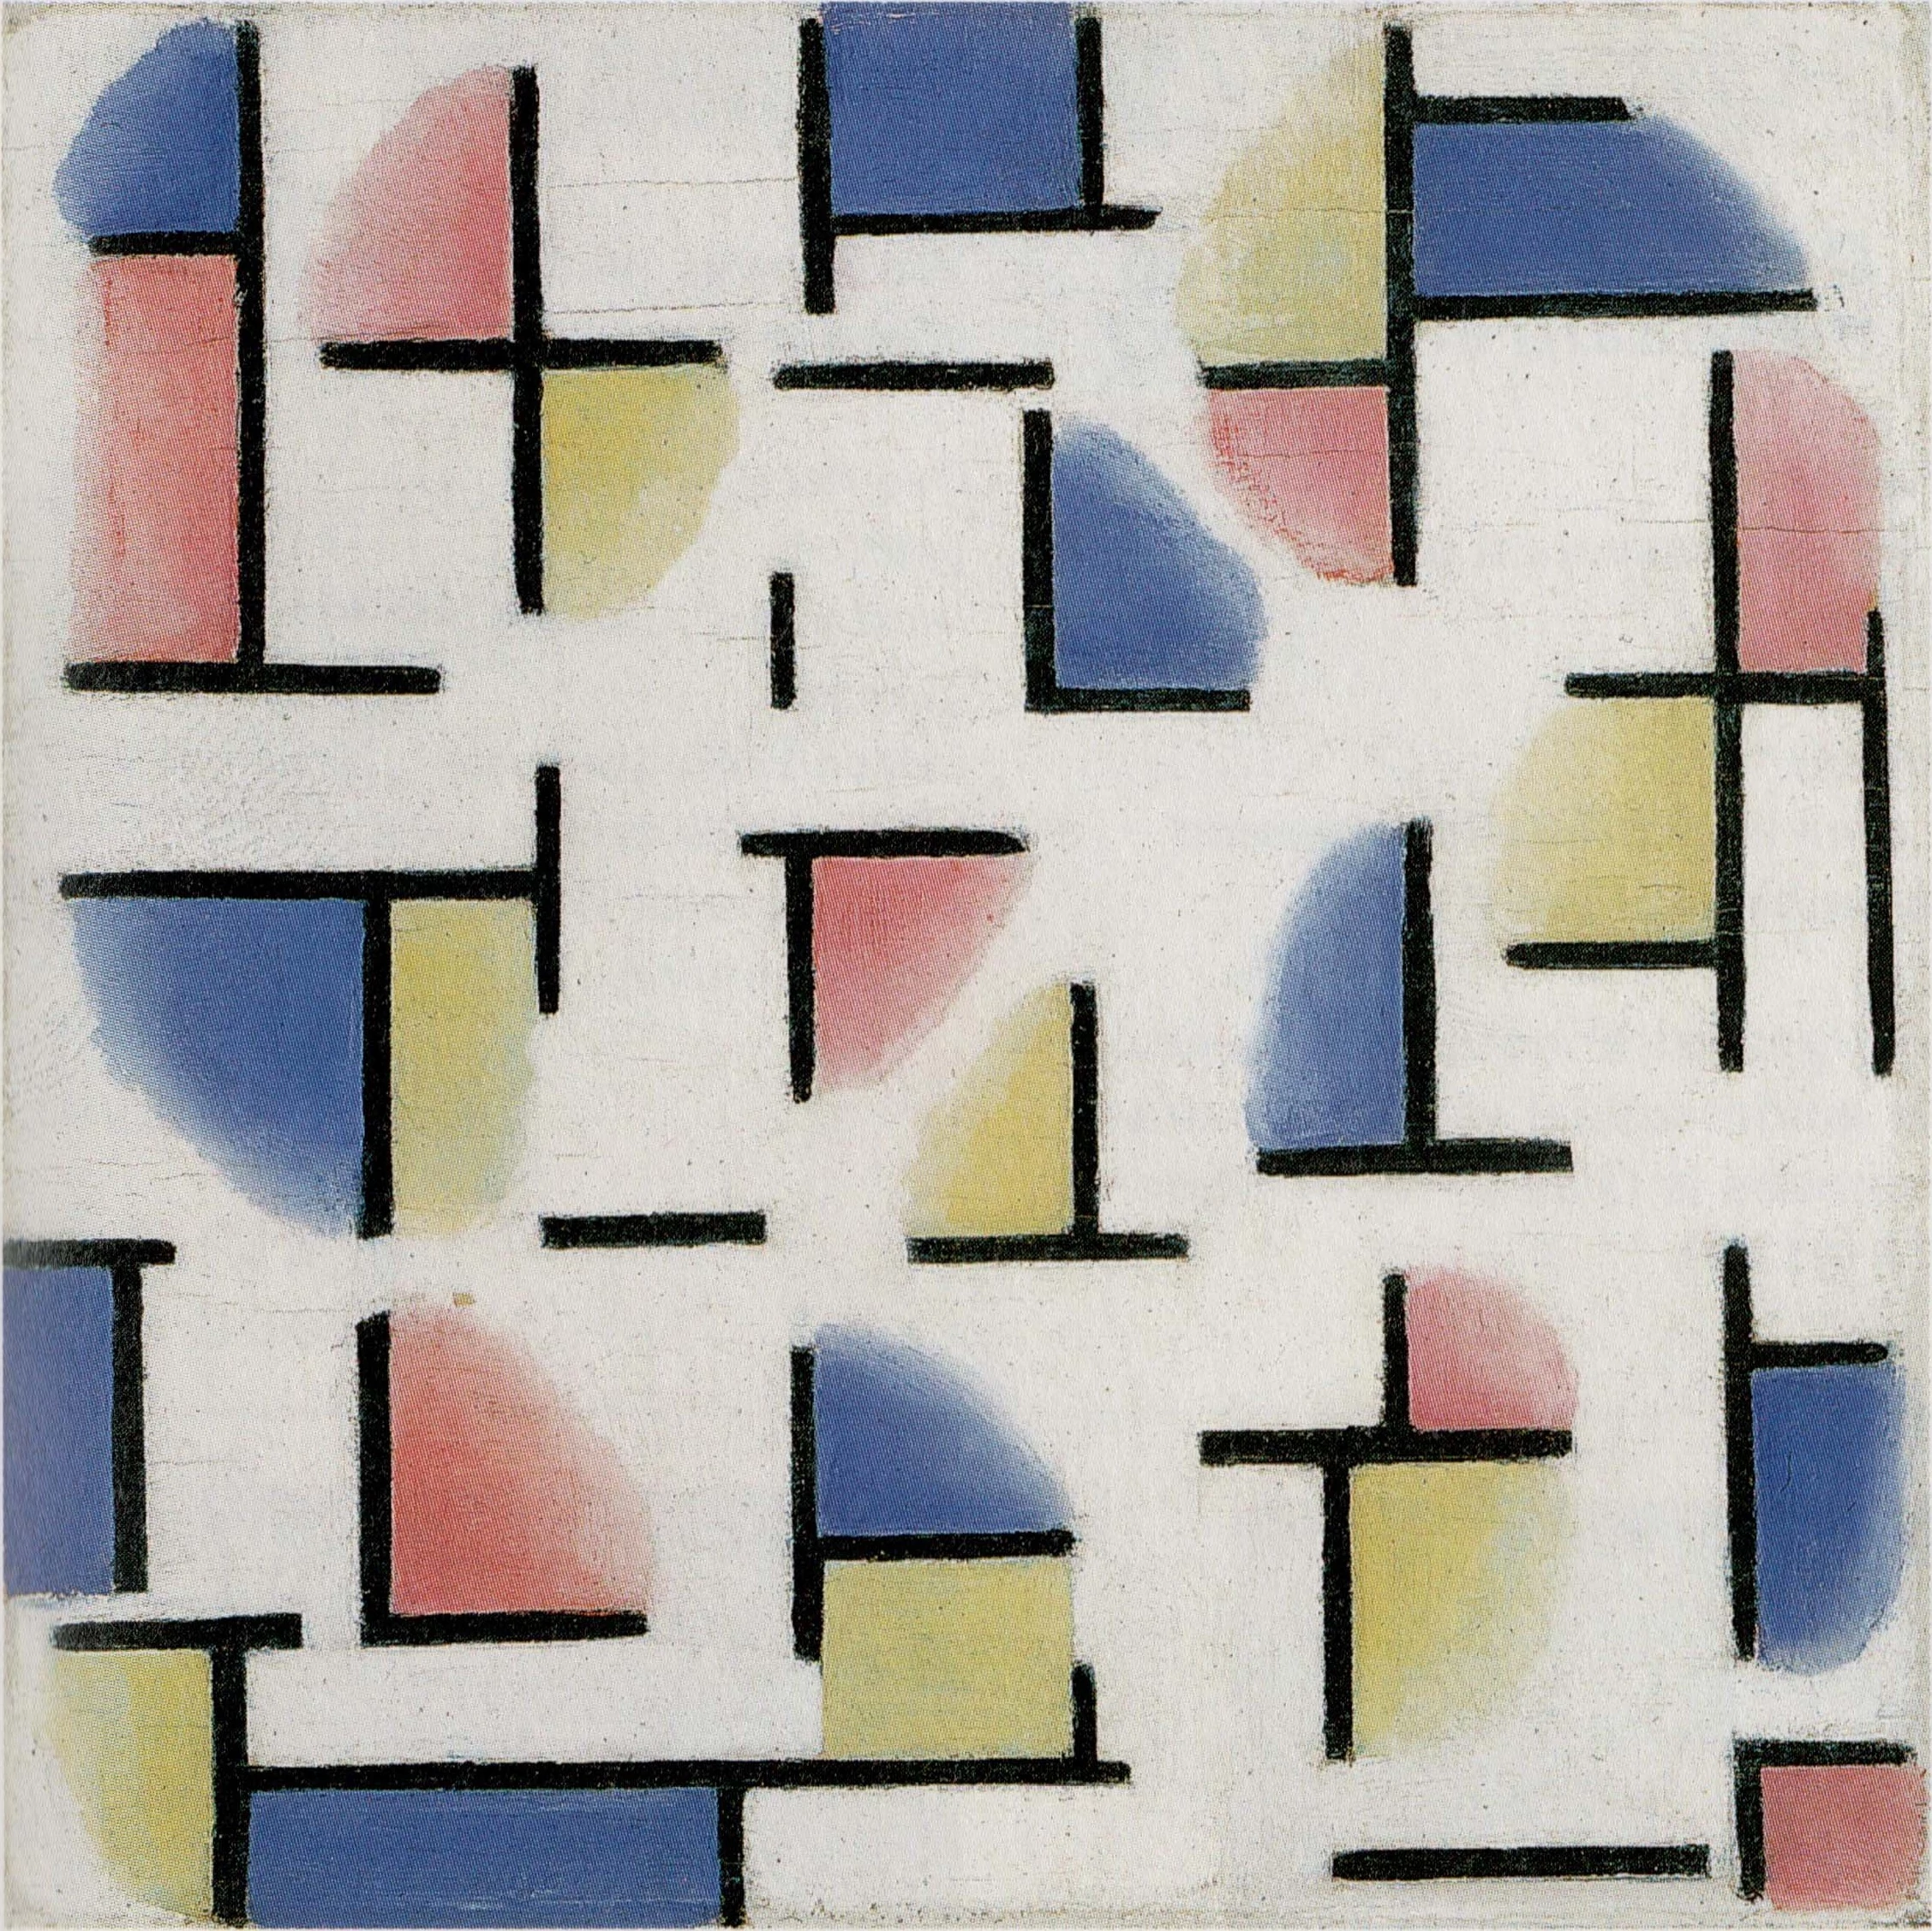 Variation on Composition XIII, Theo van Doesburg